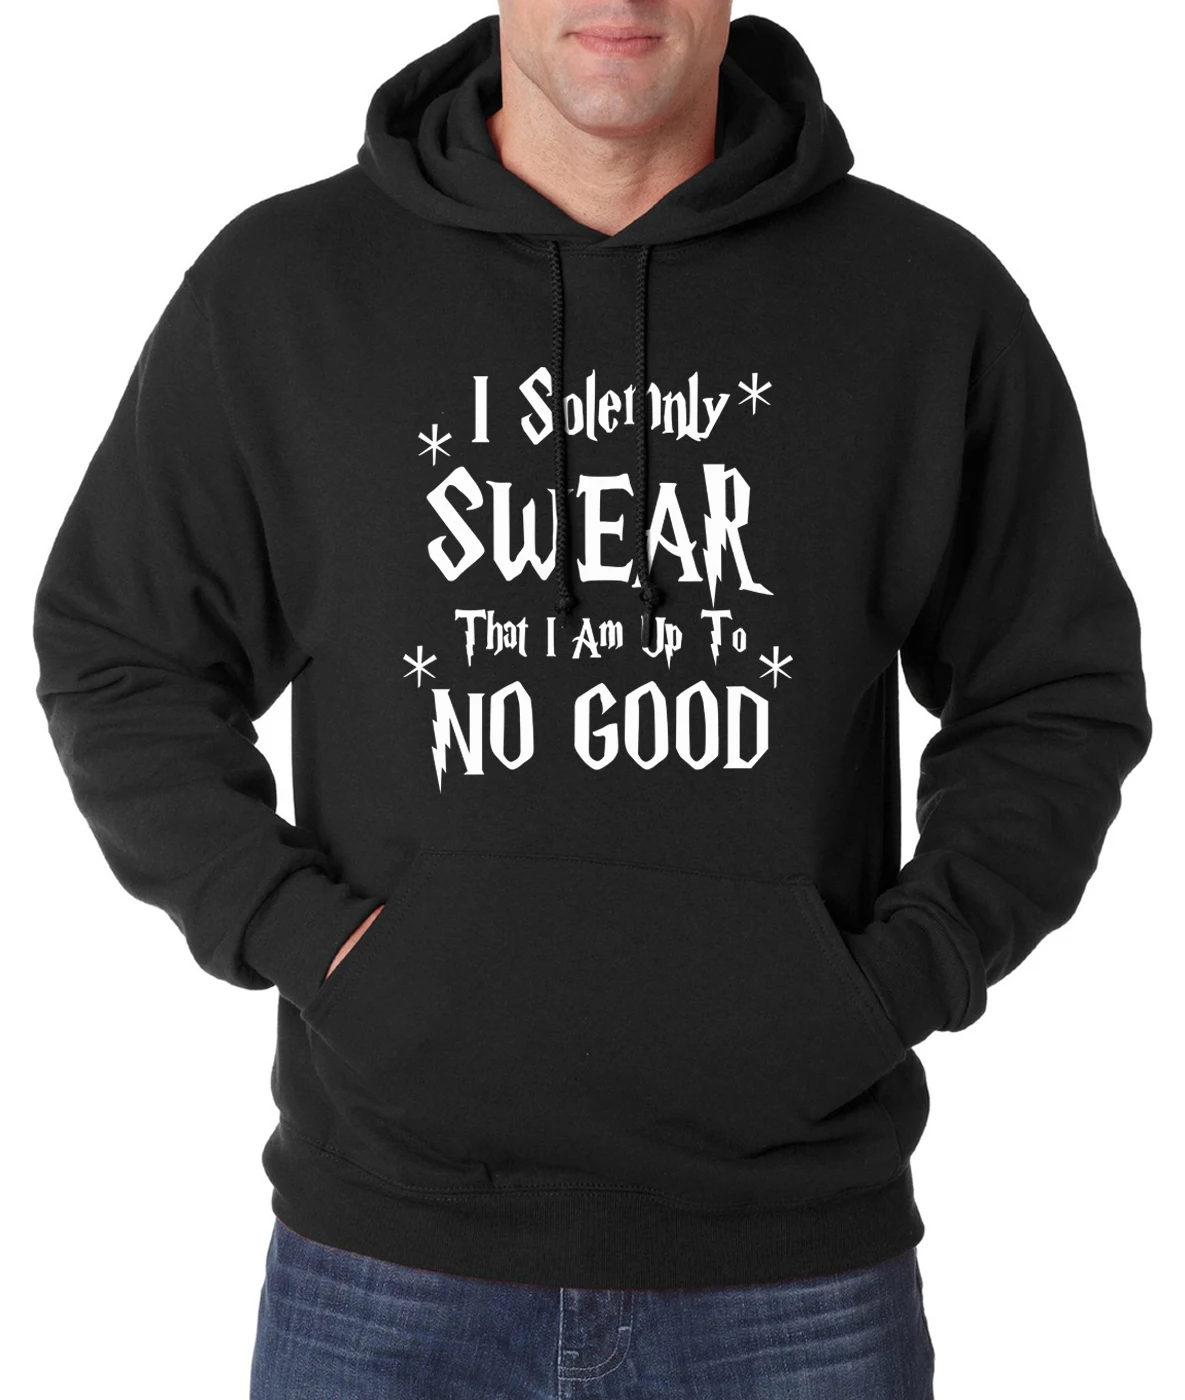 

Funny Men Sweatshirt Hoodies I Solemnly Swear- That I Am Up To No Good letters 2019 spring winter warm fleece hoodie hipster men